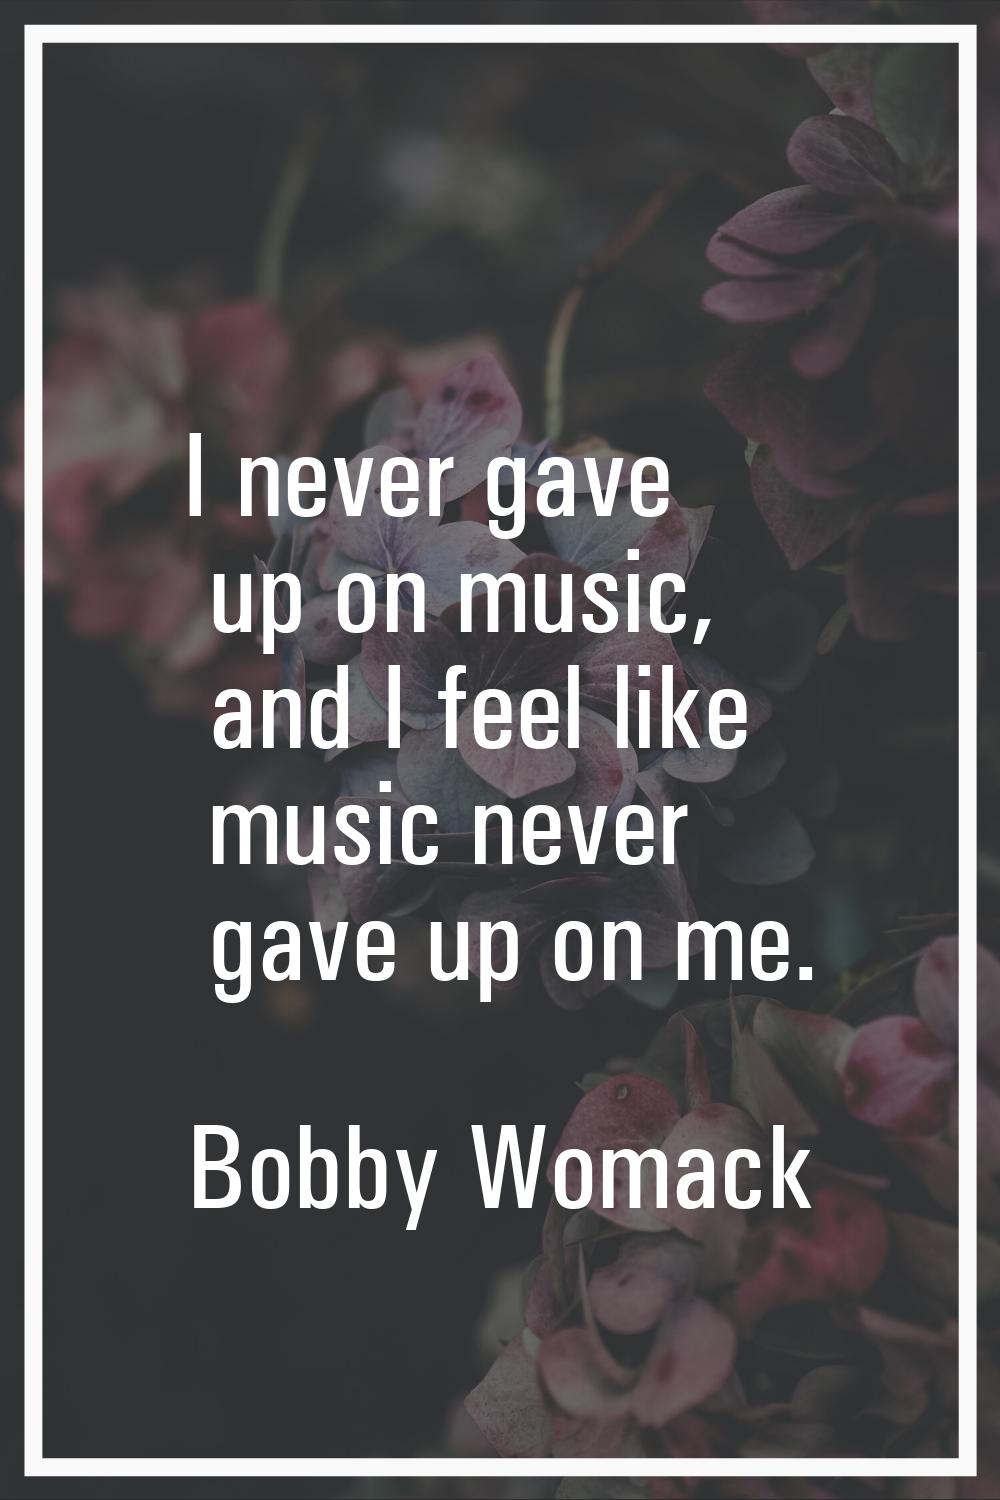 I never gave up on music, and I feel like music never gave up on me.